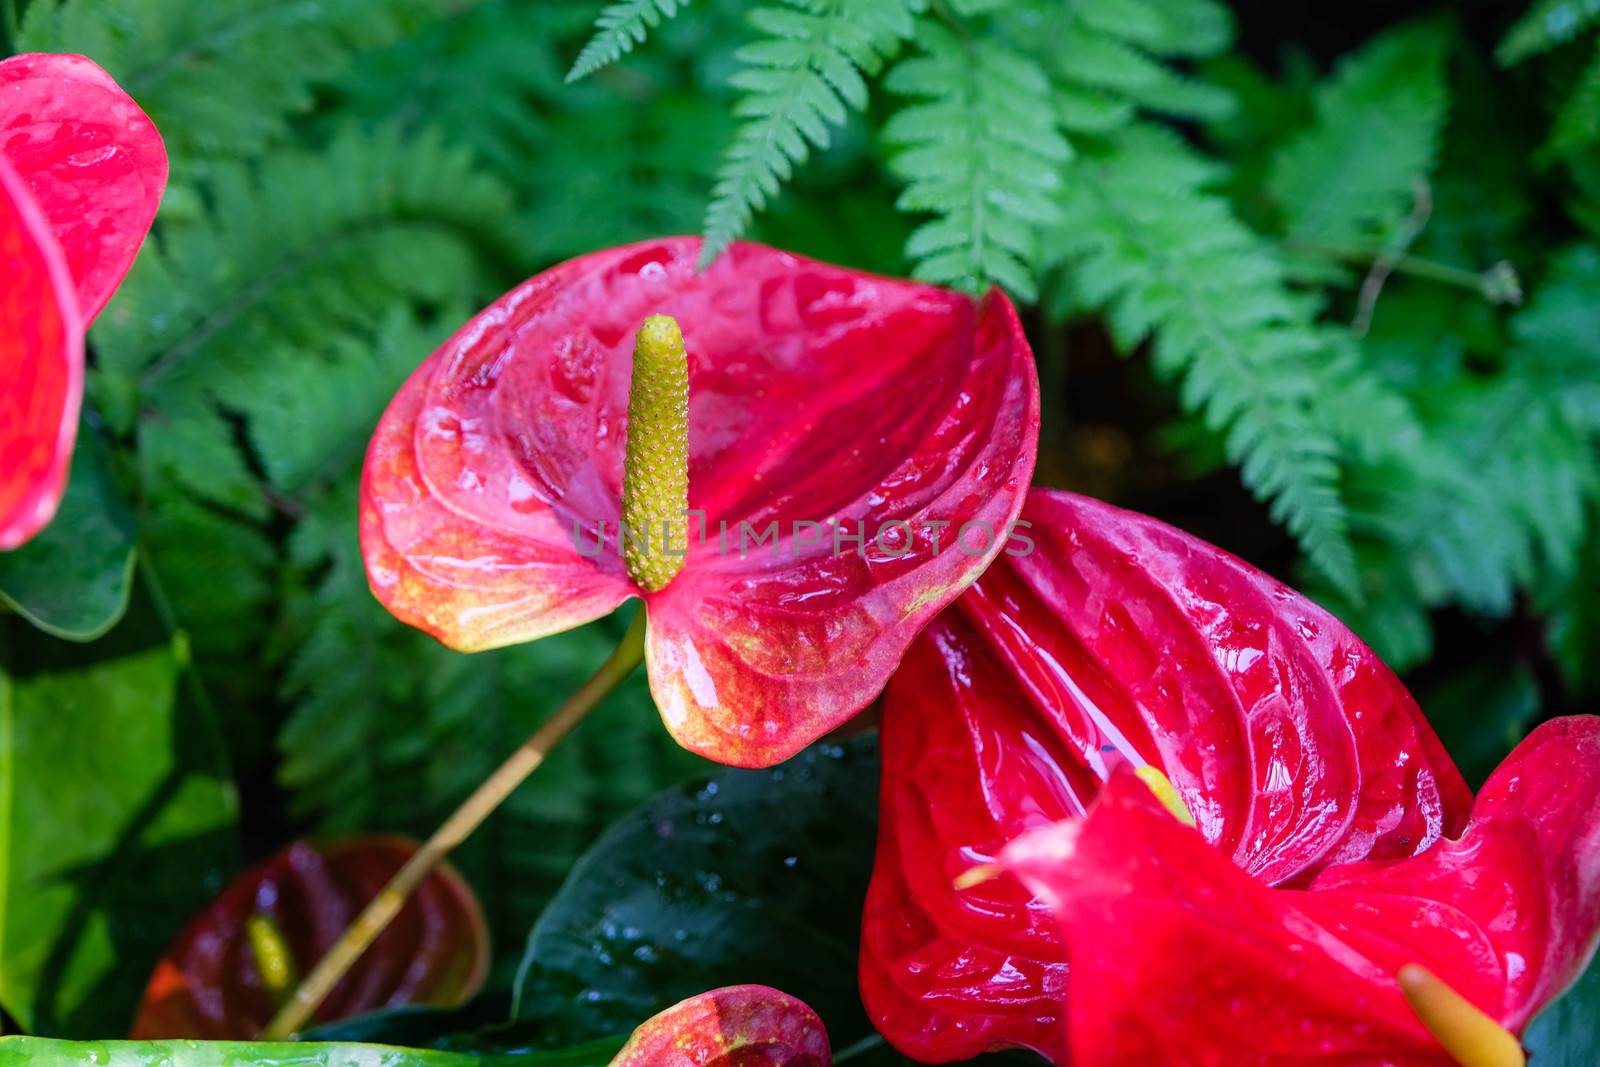 Anthurium is a red heart-shaped flower. Dark green leaves as a background make the flowers stand out beautifully. Anthuriums have come to symbolize hospitality. by peerapixs